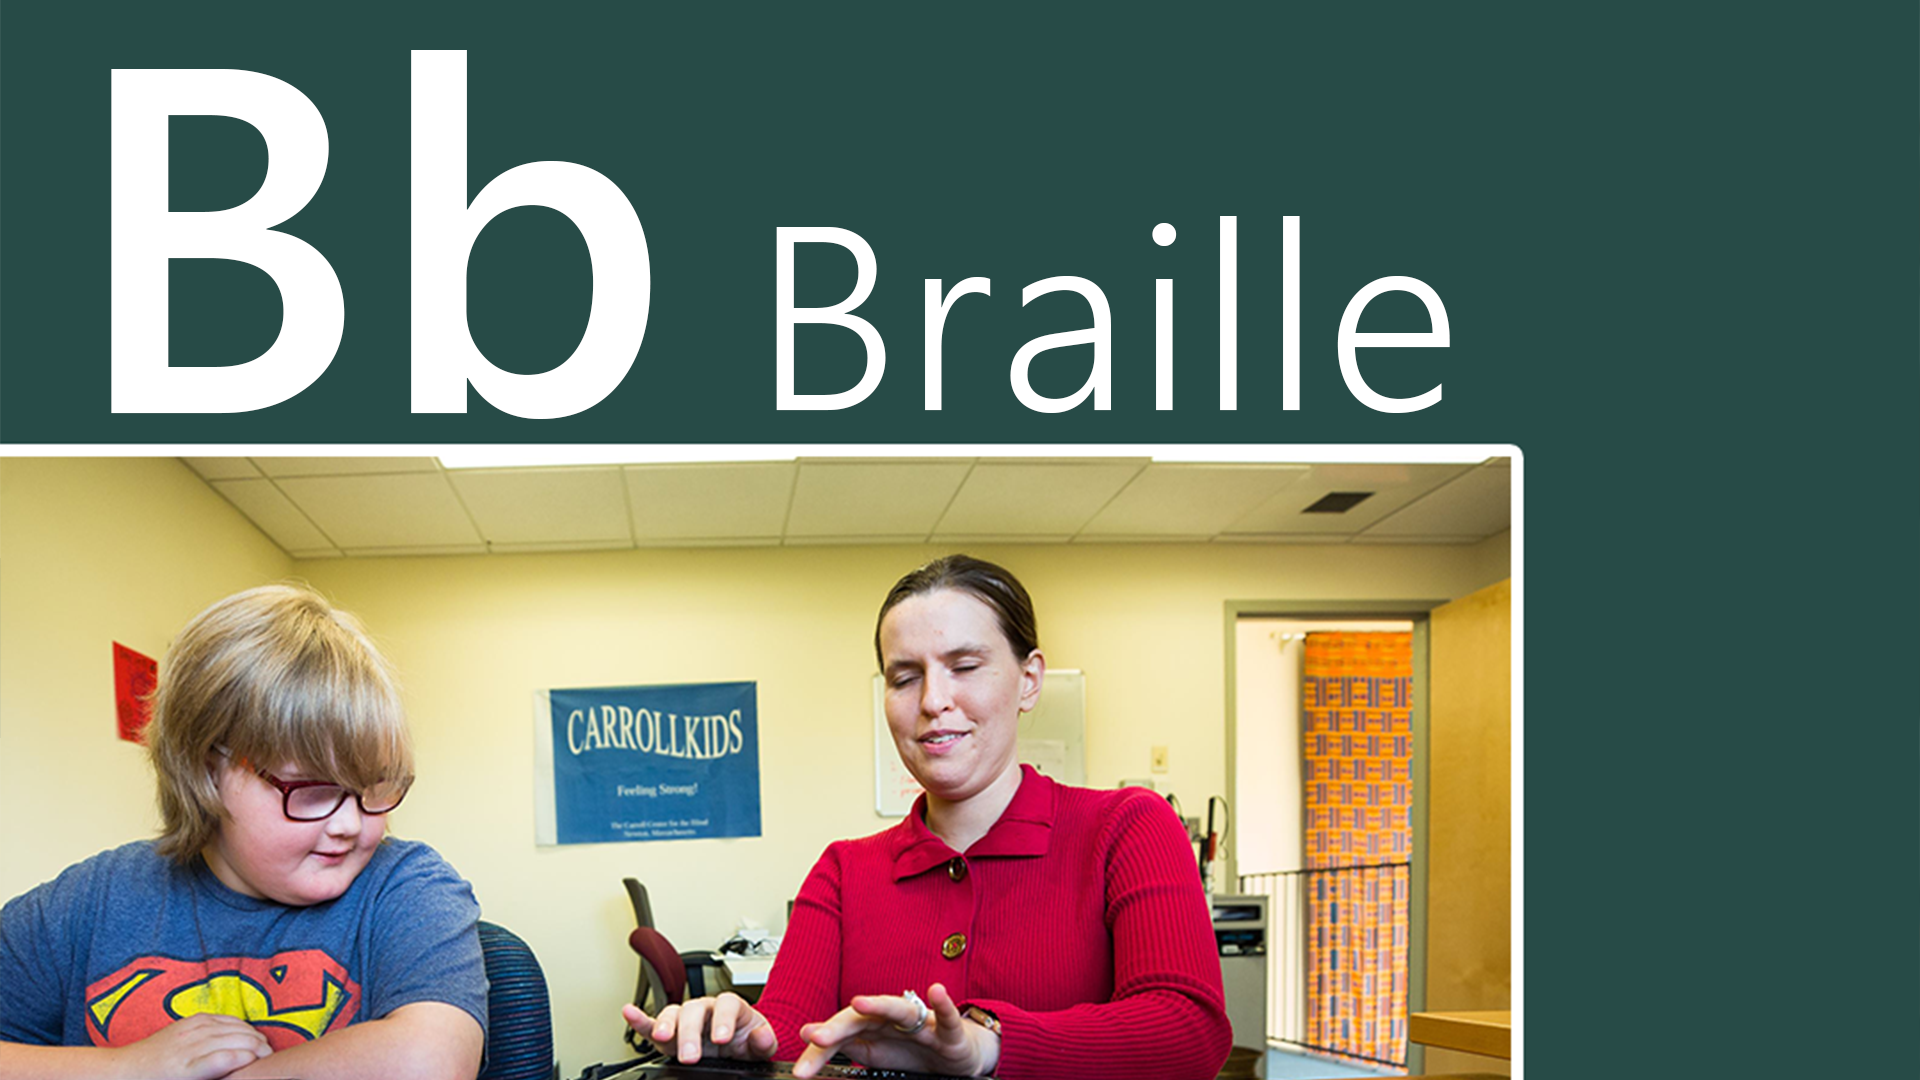 B is for Braille. A woman who is blind teaches a student of the Carroll Kids program